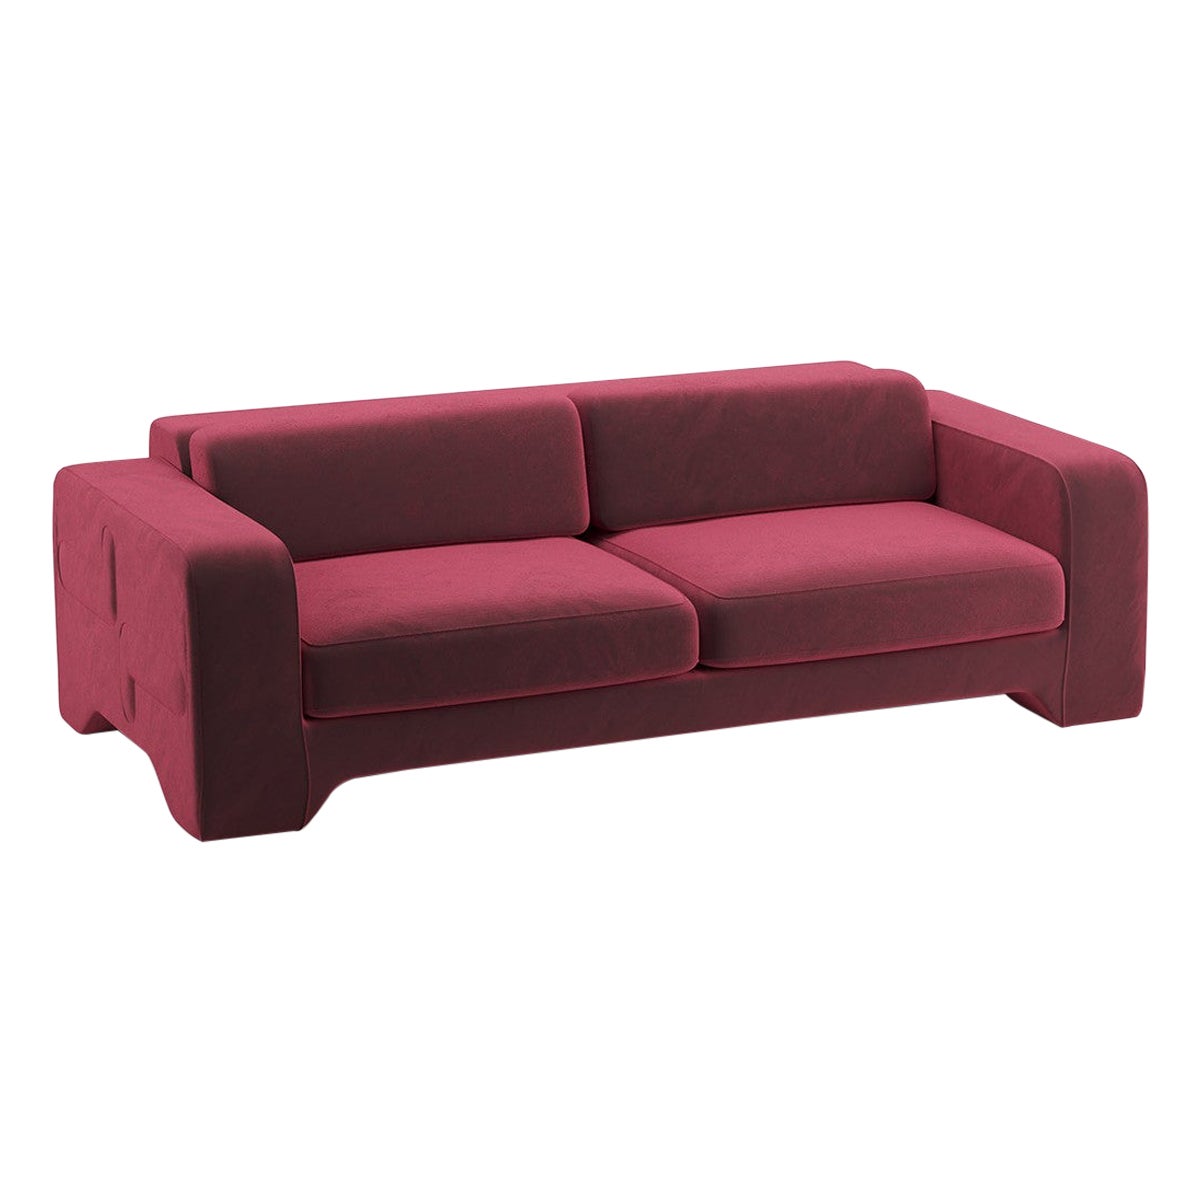 Popus Editions Giovanna 2.5 Seater Sofa in Red Como Velvet Upholstery